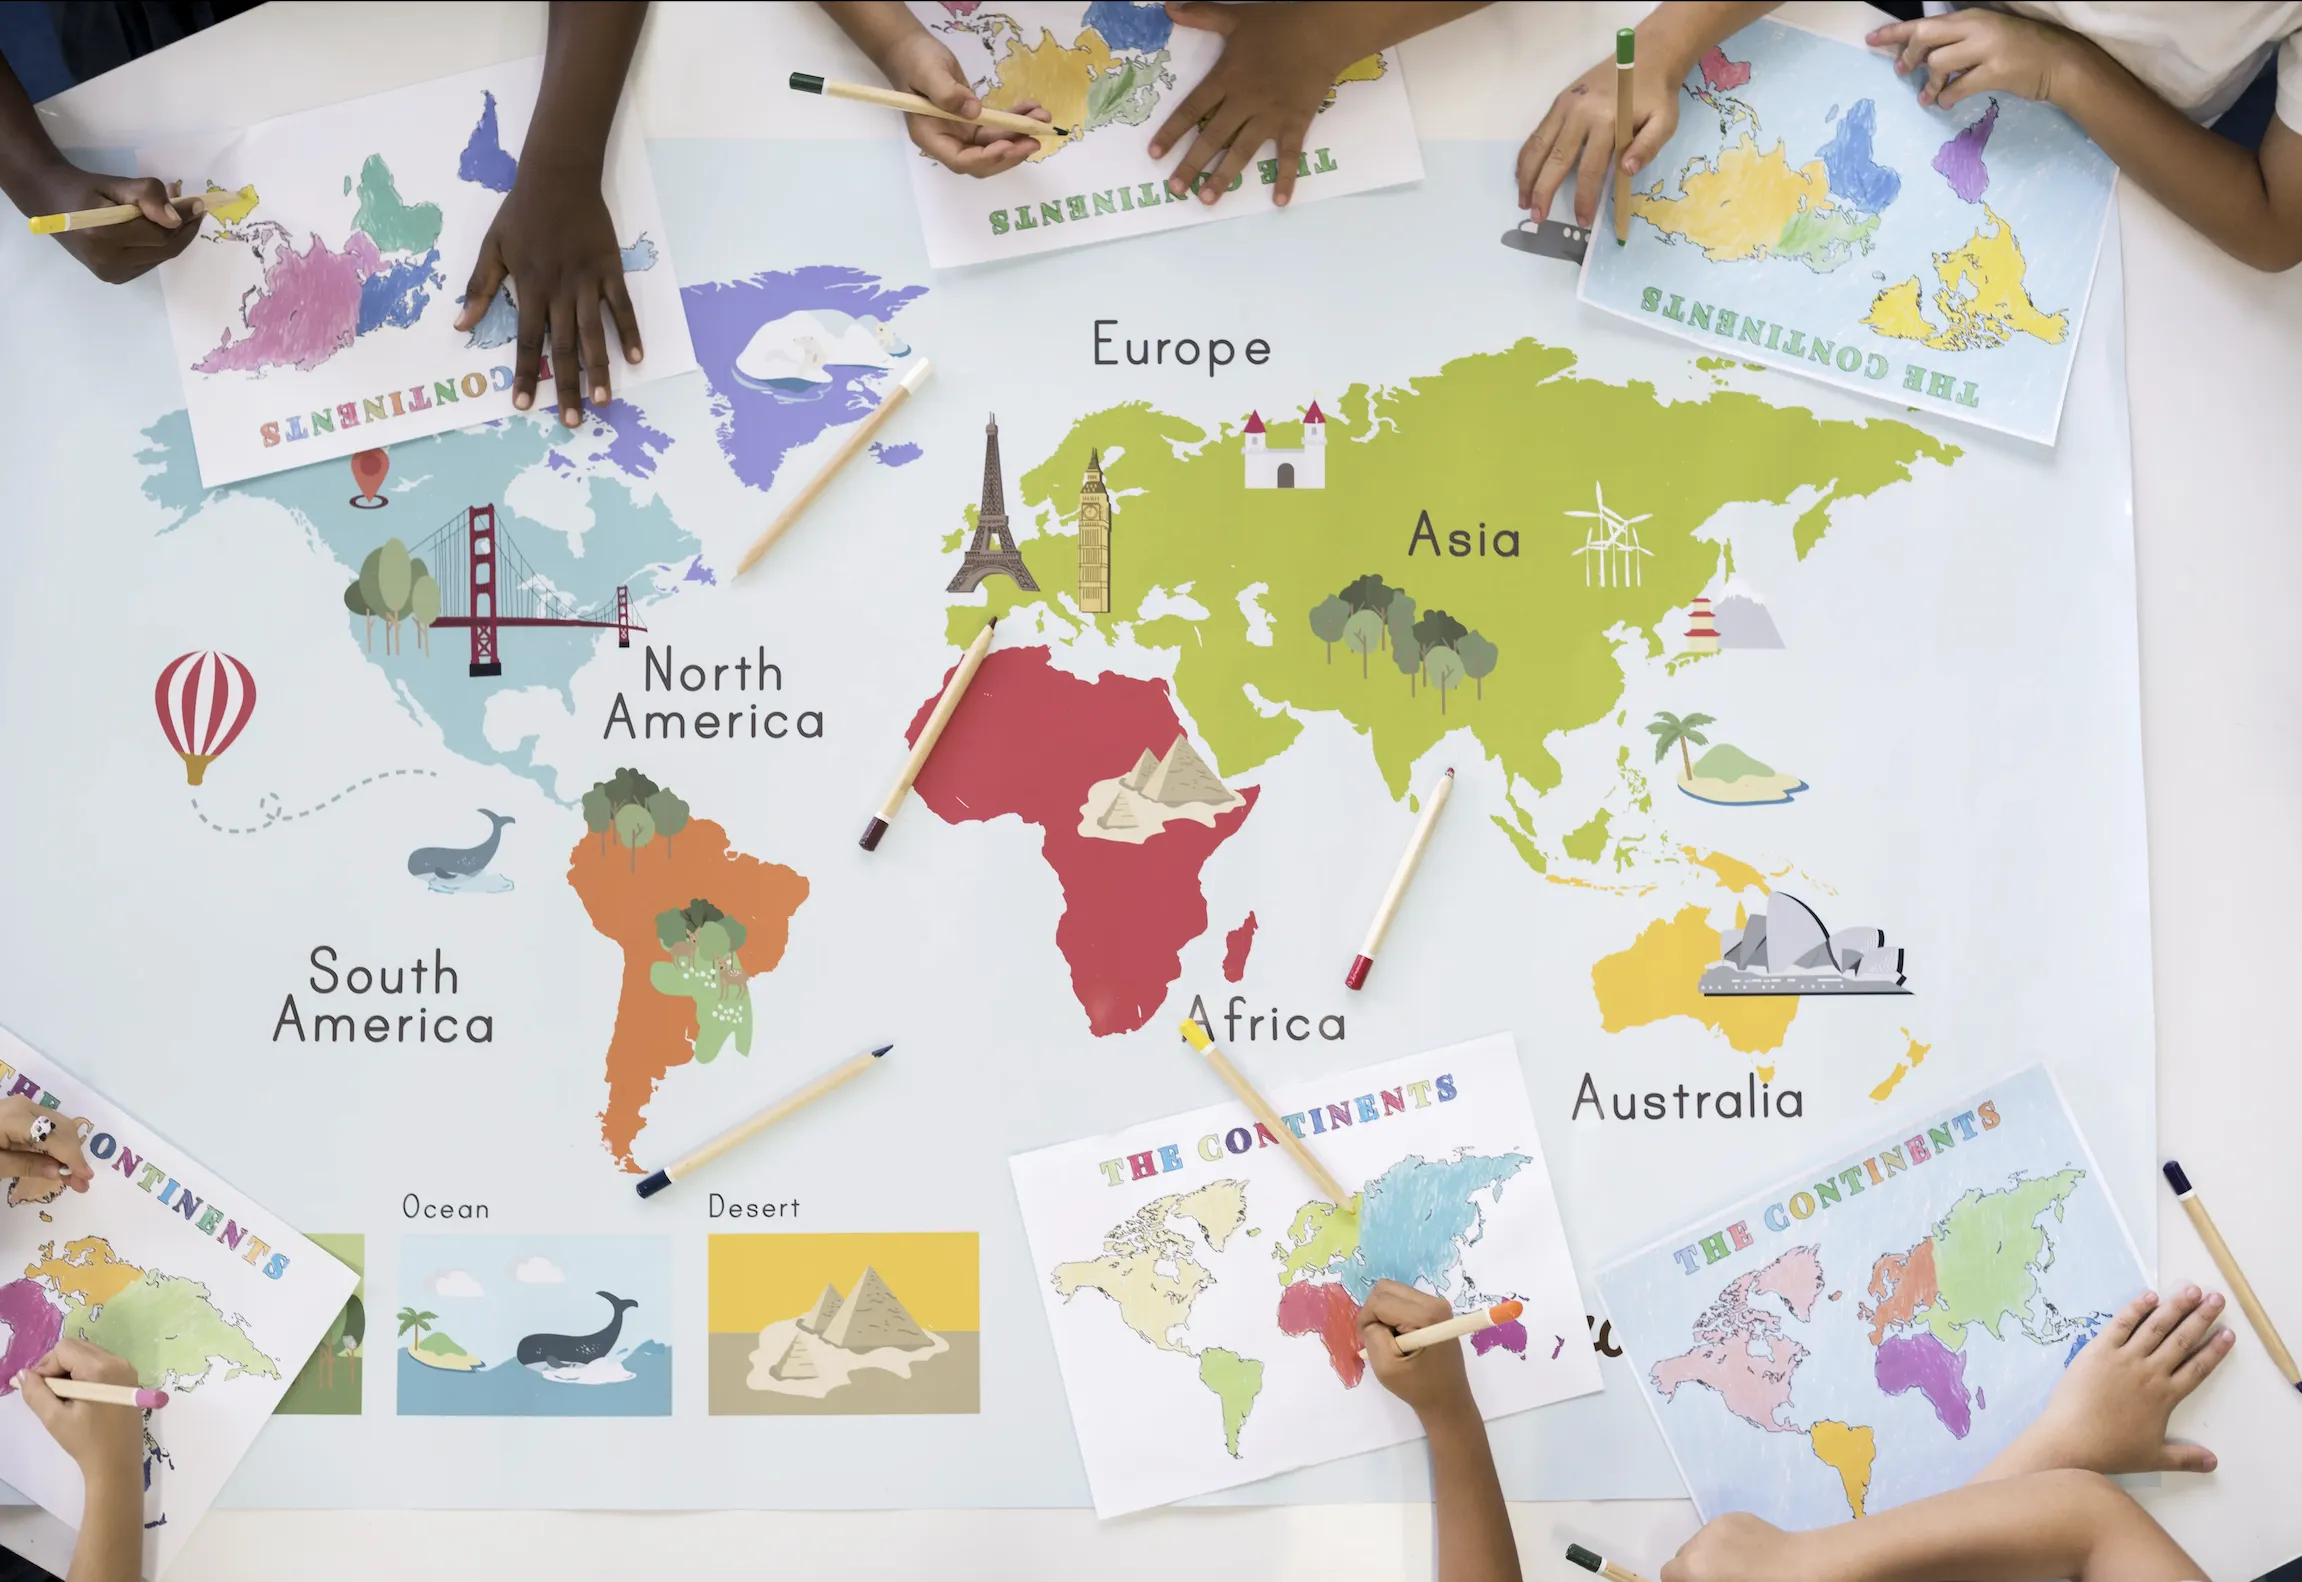 Children's hands pointing to a colorful world map, illustrating Helbeto's global reach in the chemical industry across Europe, the Middle East, and Central Asia.